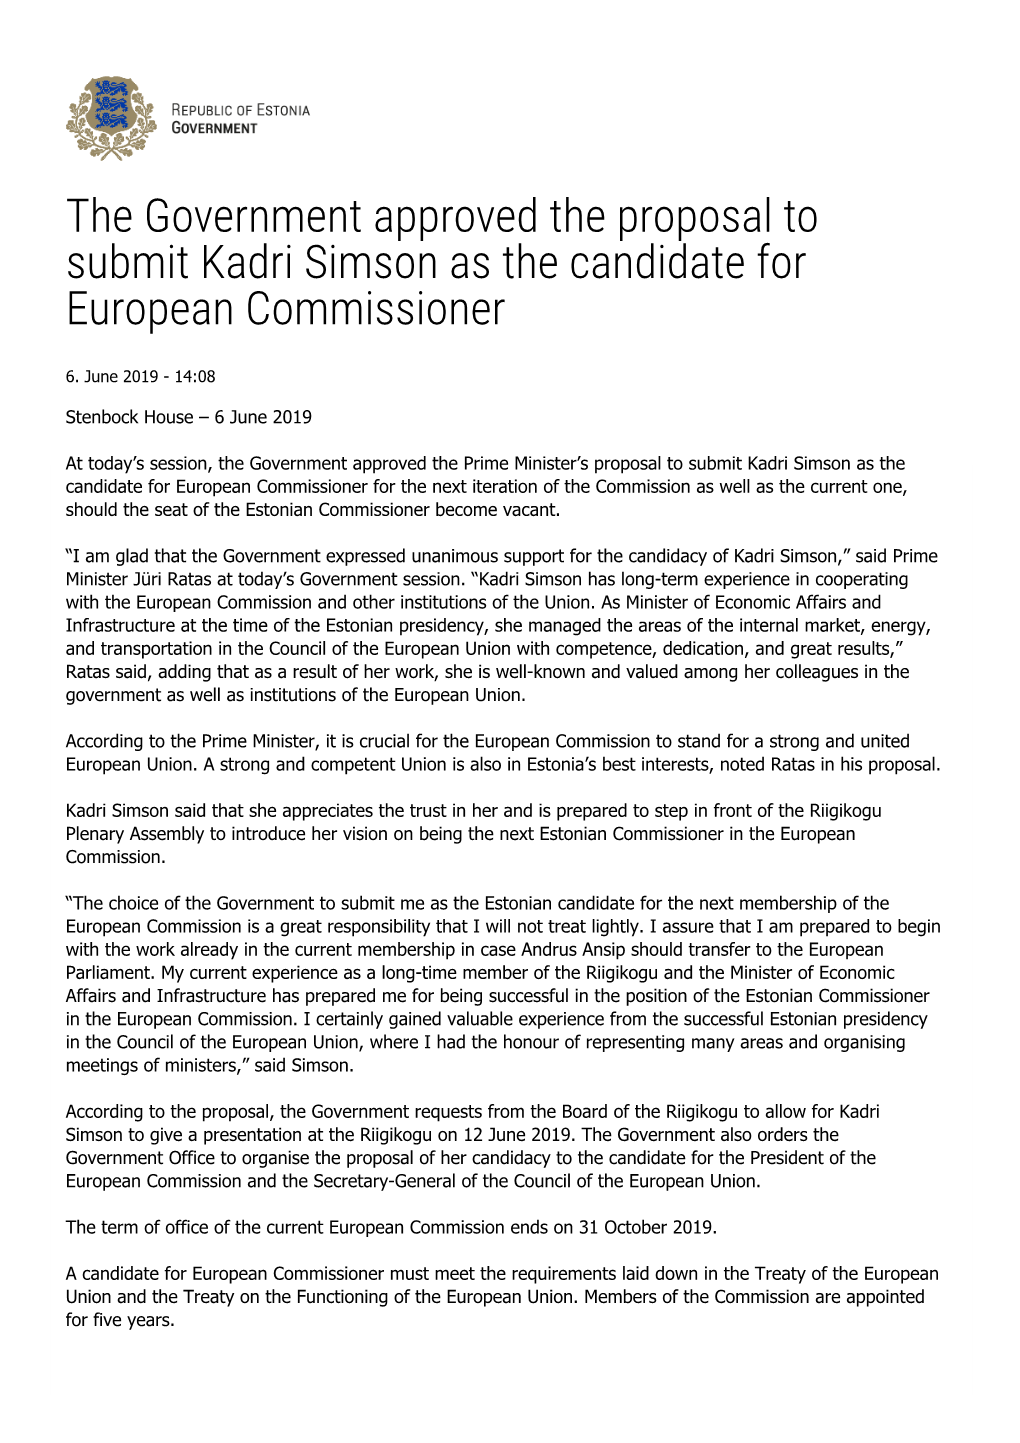 The Government Approved the Proposal to Submit Kadri Simson As the Candidate for European Commissioner